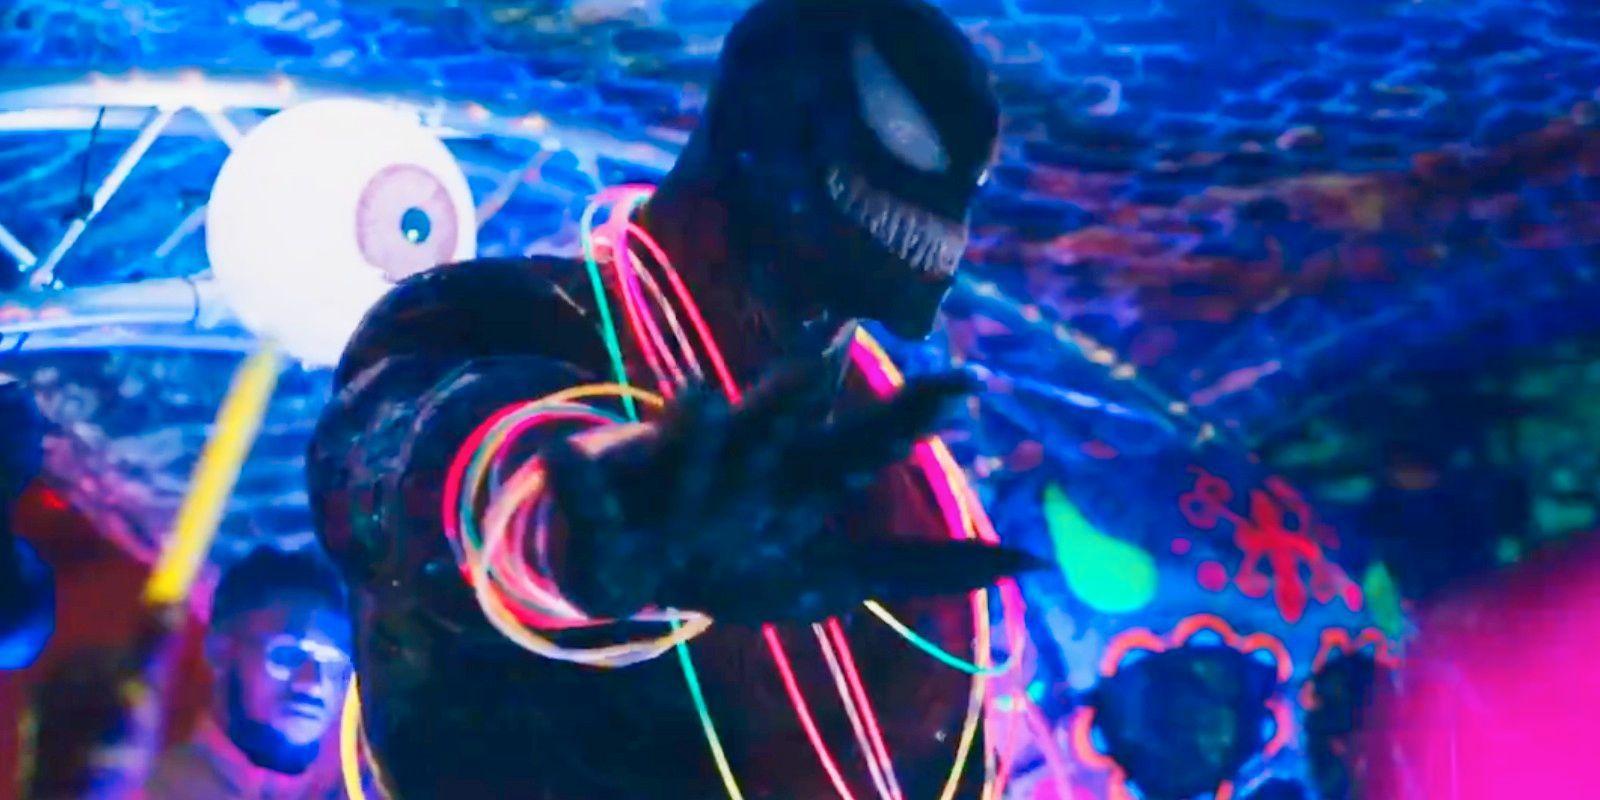 venom with neon bracelts and necklaces in an underground rave